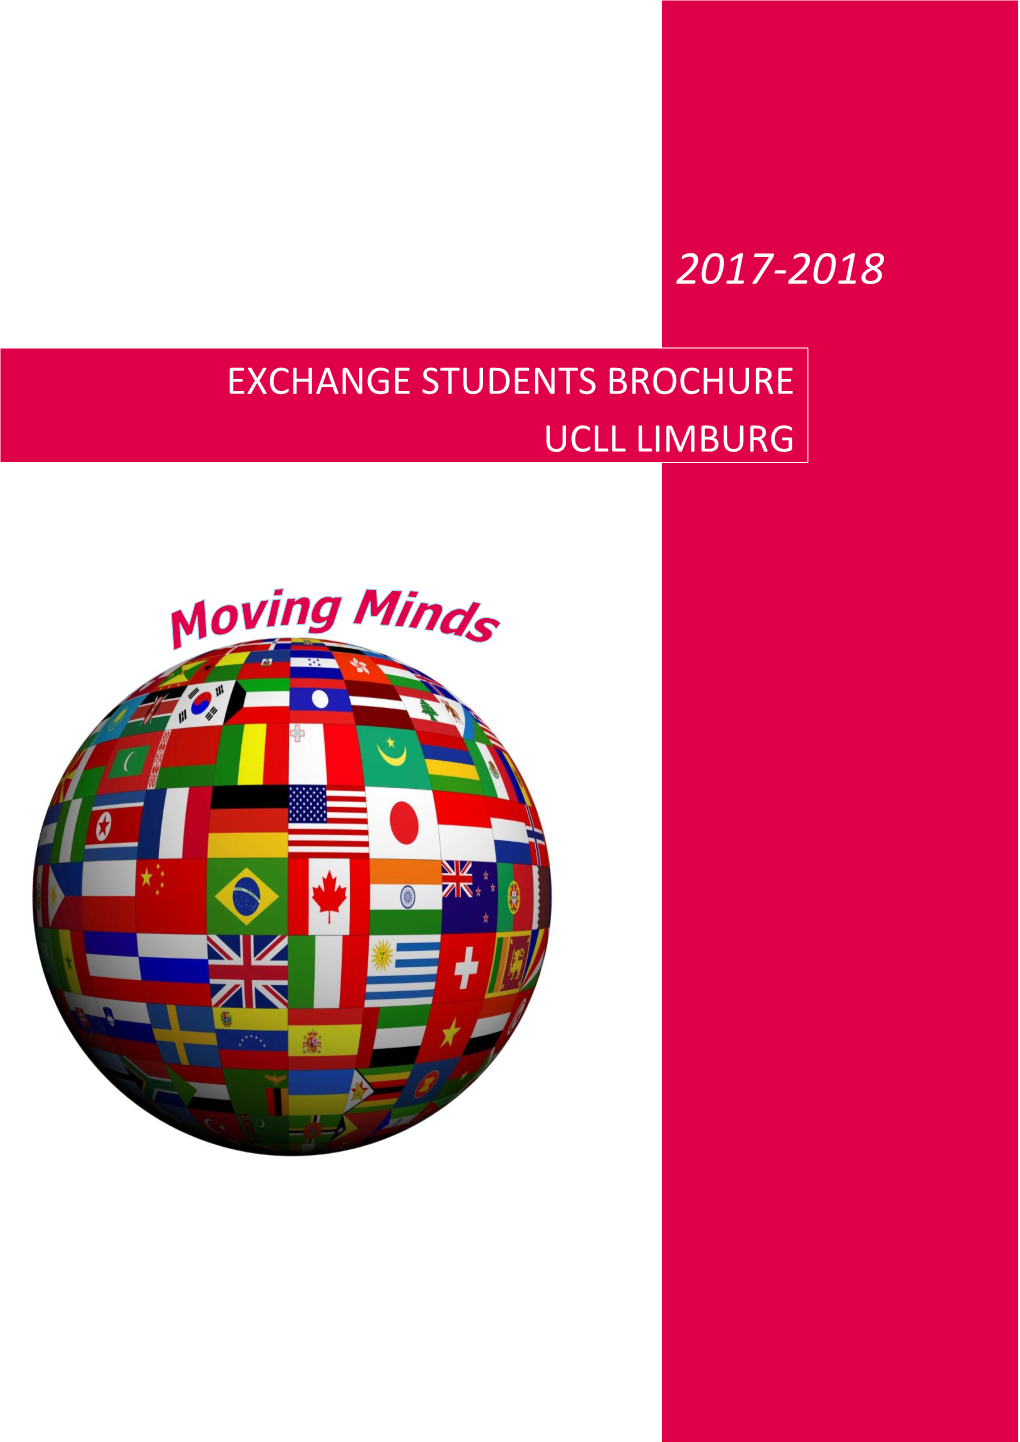 Exchange Students Brochure Ucll Limburg Table of Contents